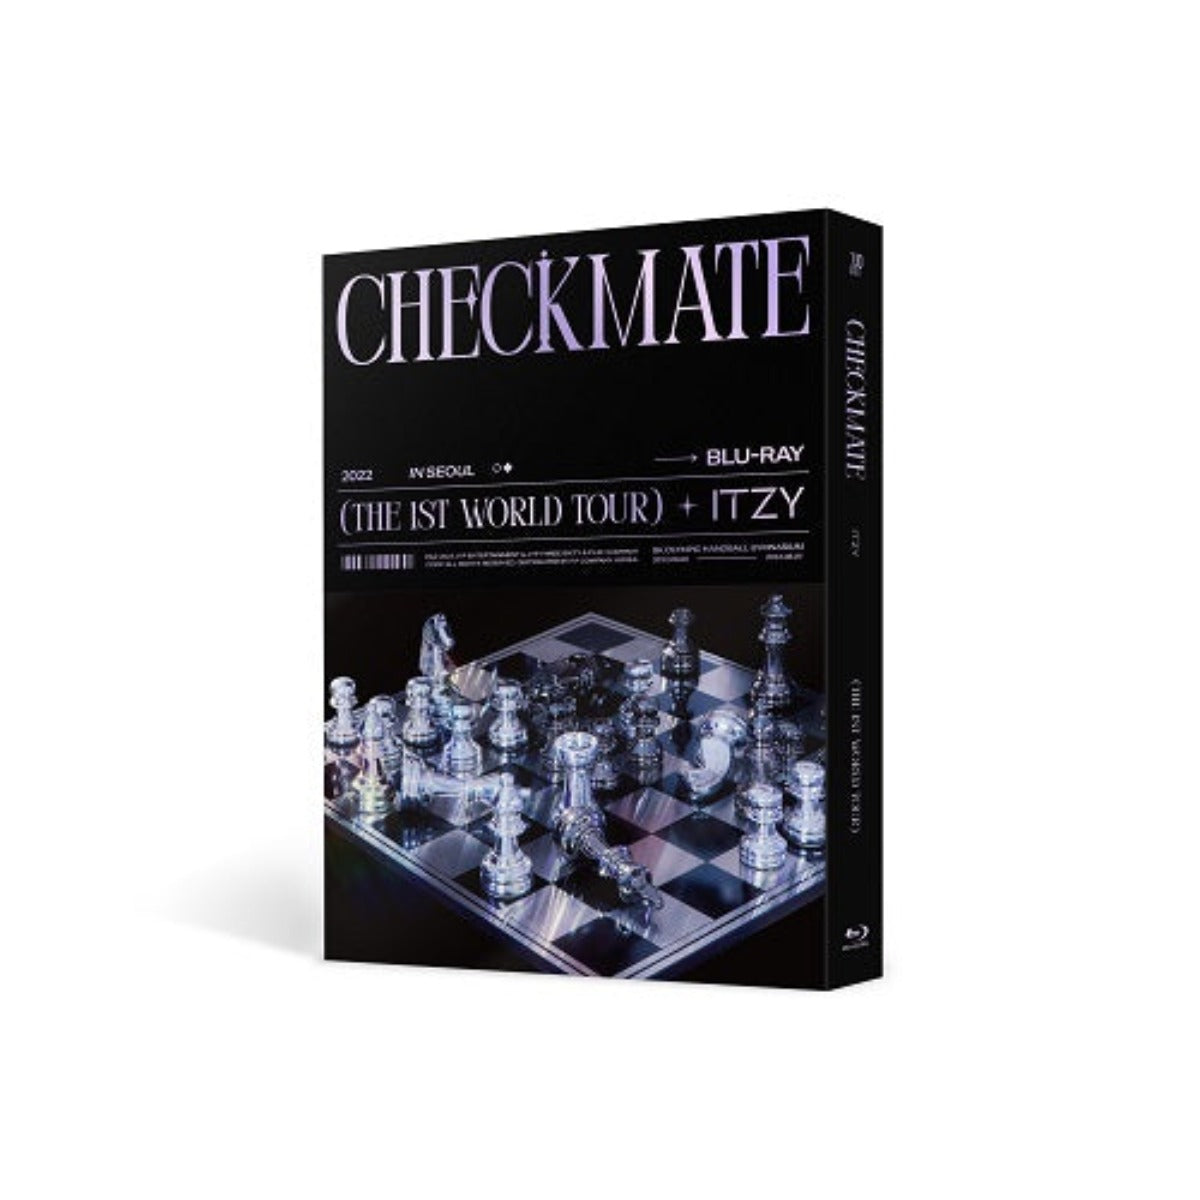 2022 ITZY THE 1ST WORLD TOUR [CHECKMATE] in SEOUL (Blu-ray) (2-Disc) (Korea Version) + Photo Card Set